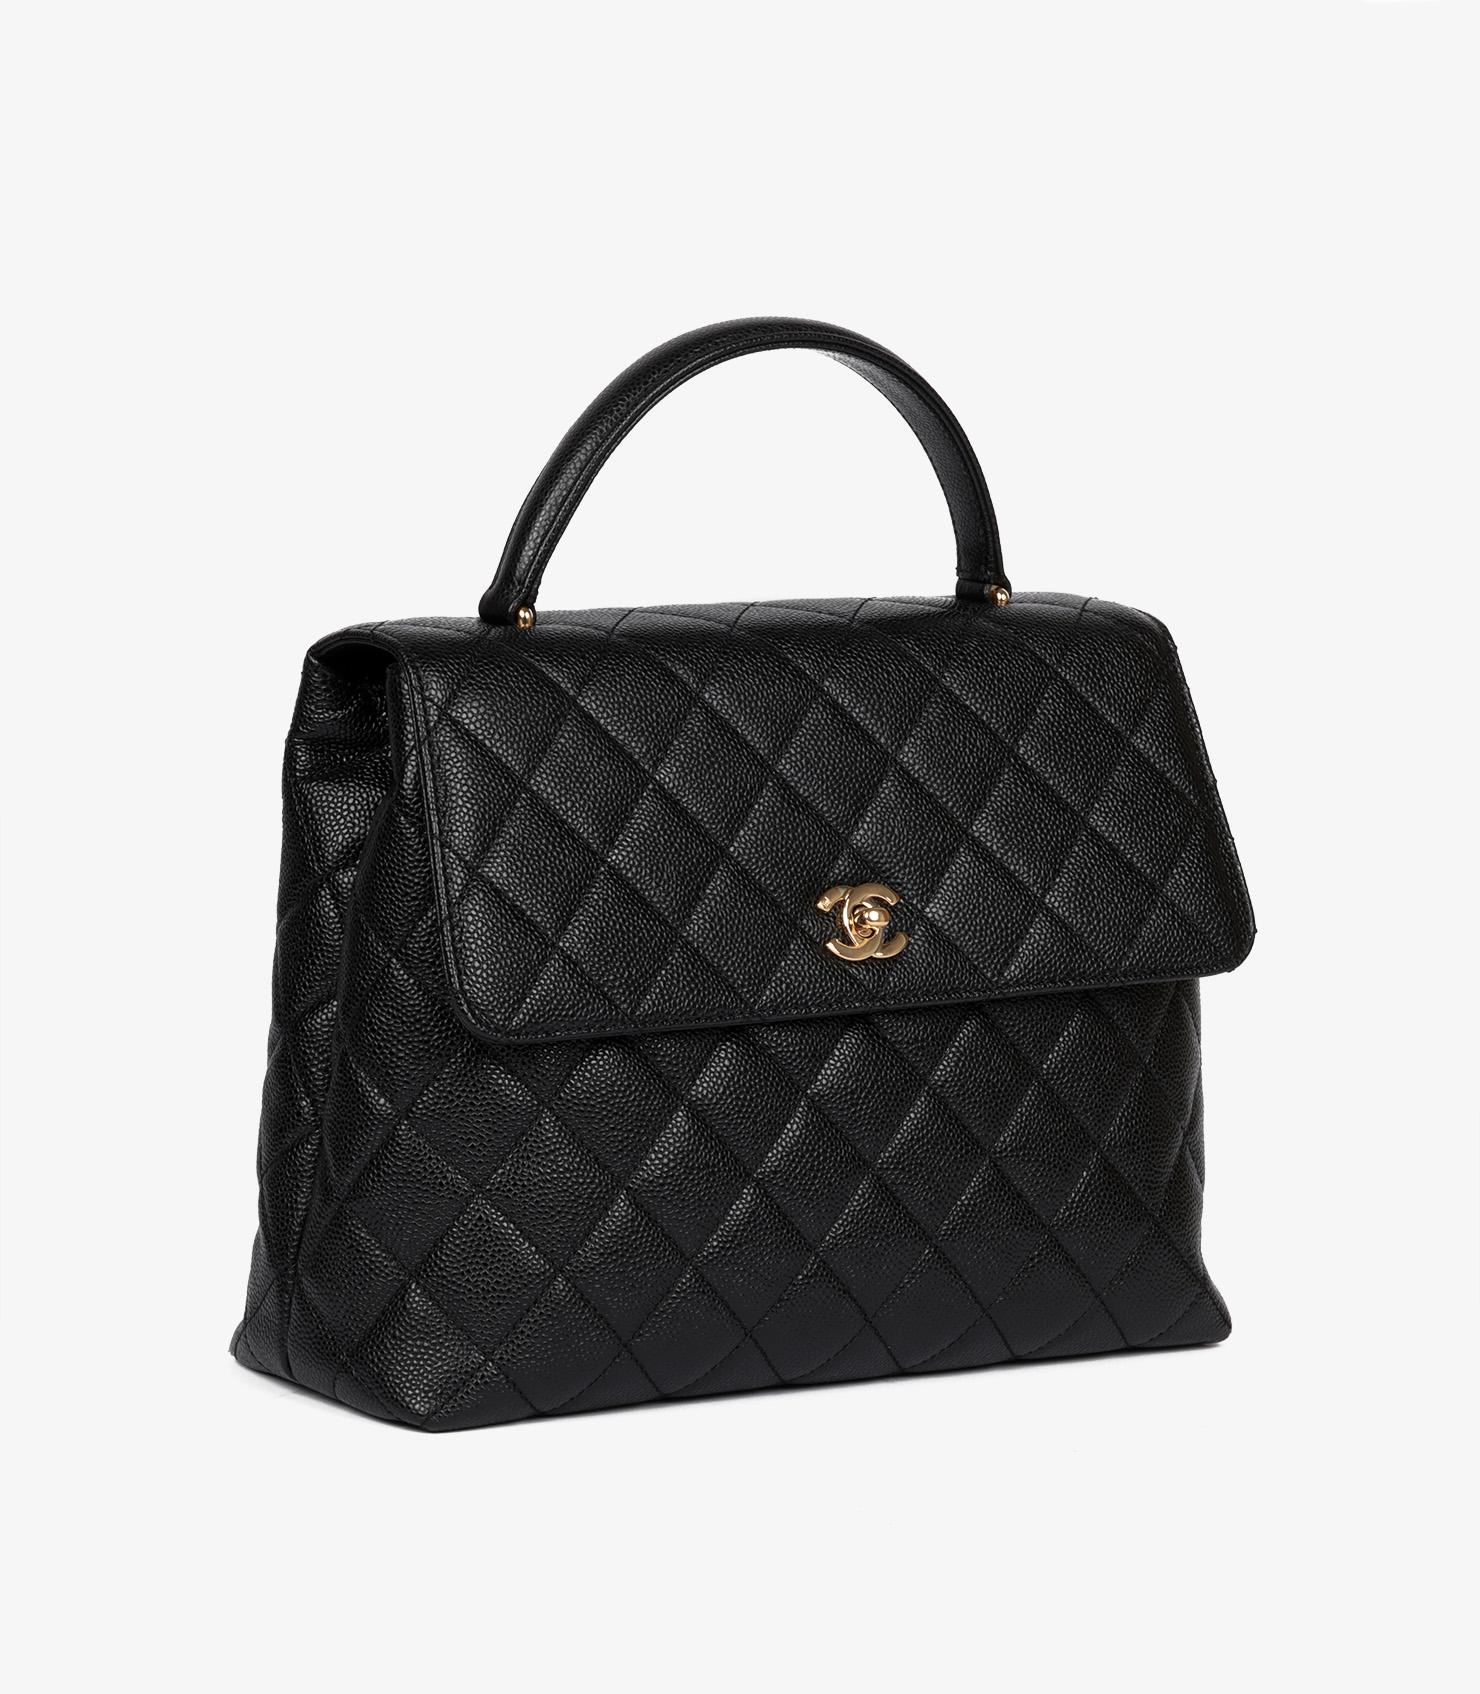 Chanel Black Quilted Caviar Leather Vintage Classic Kelly In Excellent Condition For Sale In Bishop's Stortford, Hertfordshire